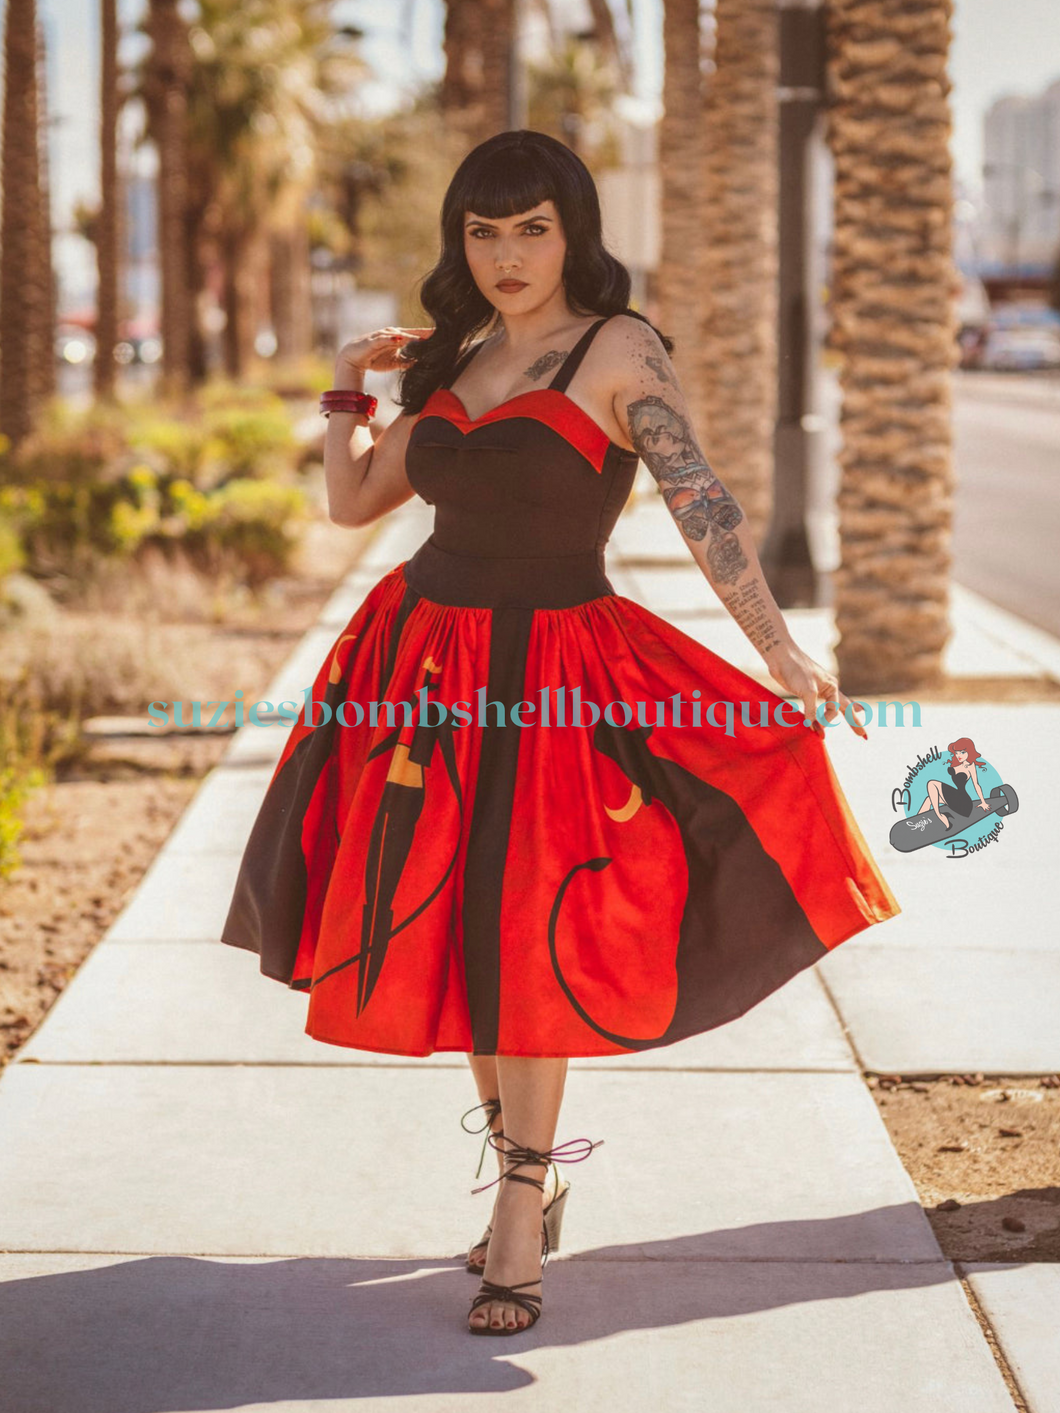 Boulevard Nights Custom Matador Border Print Dress Black and red sundress with midcentury modern artwork of matador bullfighter and bull retro vintage pinup 40s 50s rockabilly ladies swing dress with pockets Canadian Pin-Up Shop Suzie's Bombshell Boutique